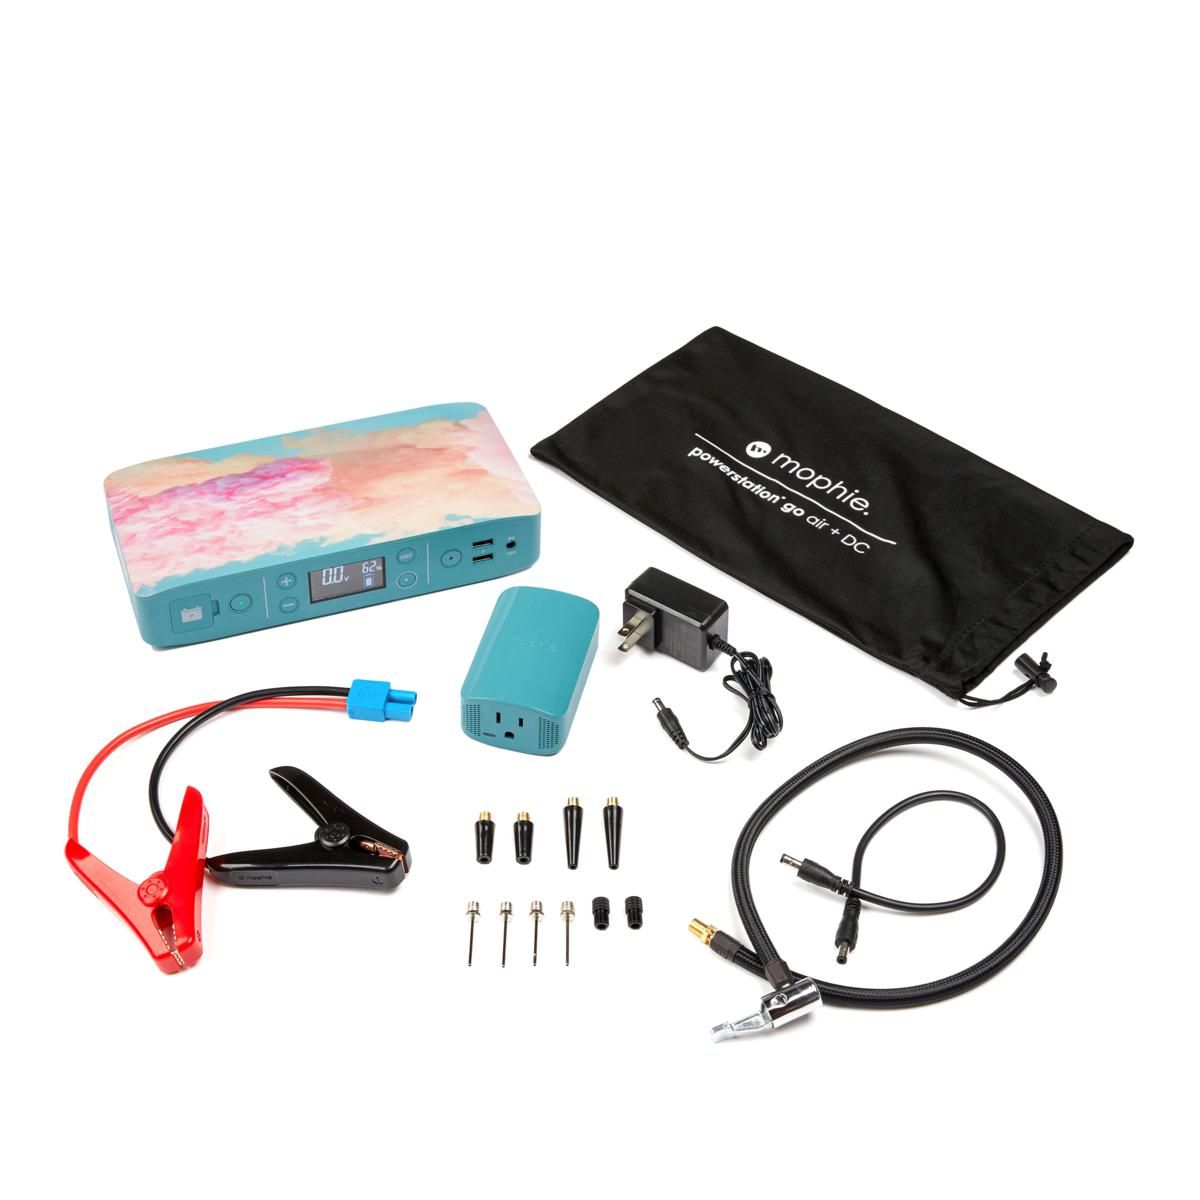 mophie
Jumpstarter, Air Compressor & Power Bank w/AC Adapter & Cables | HSN